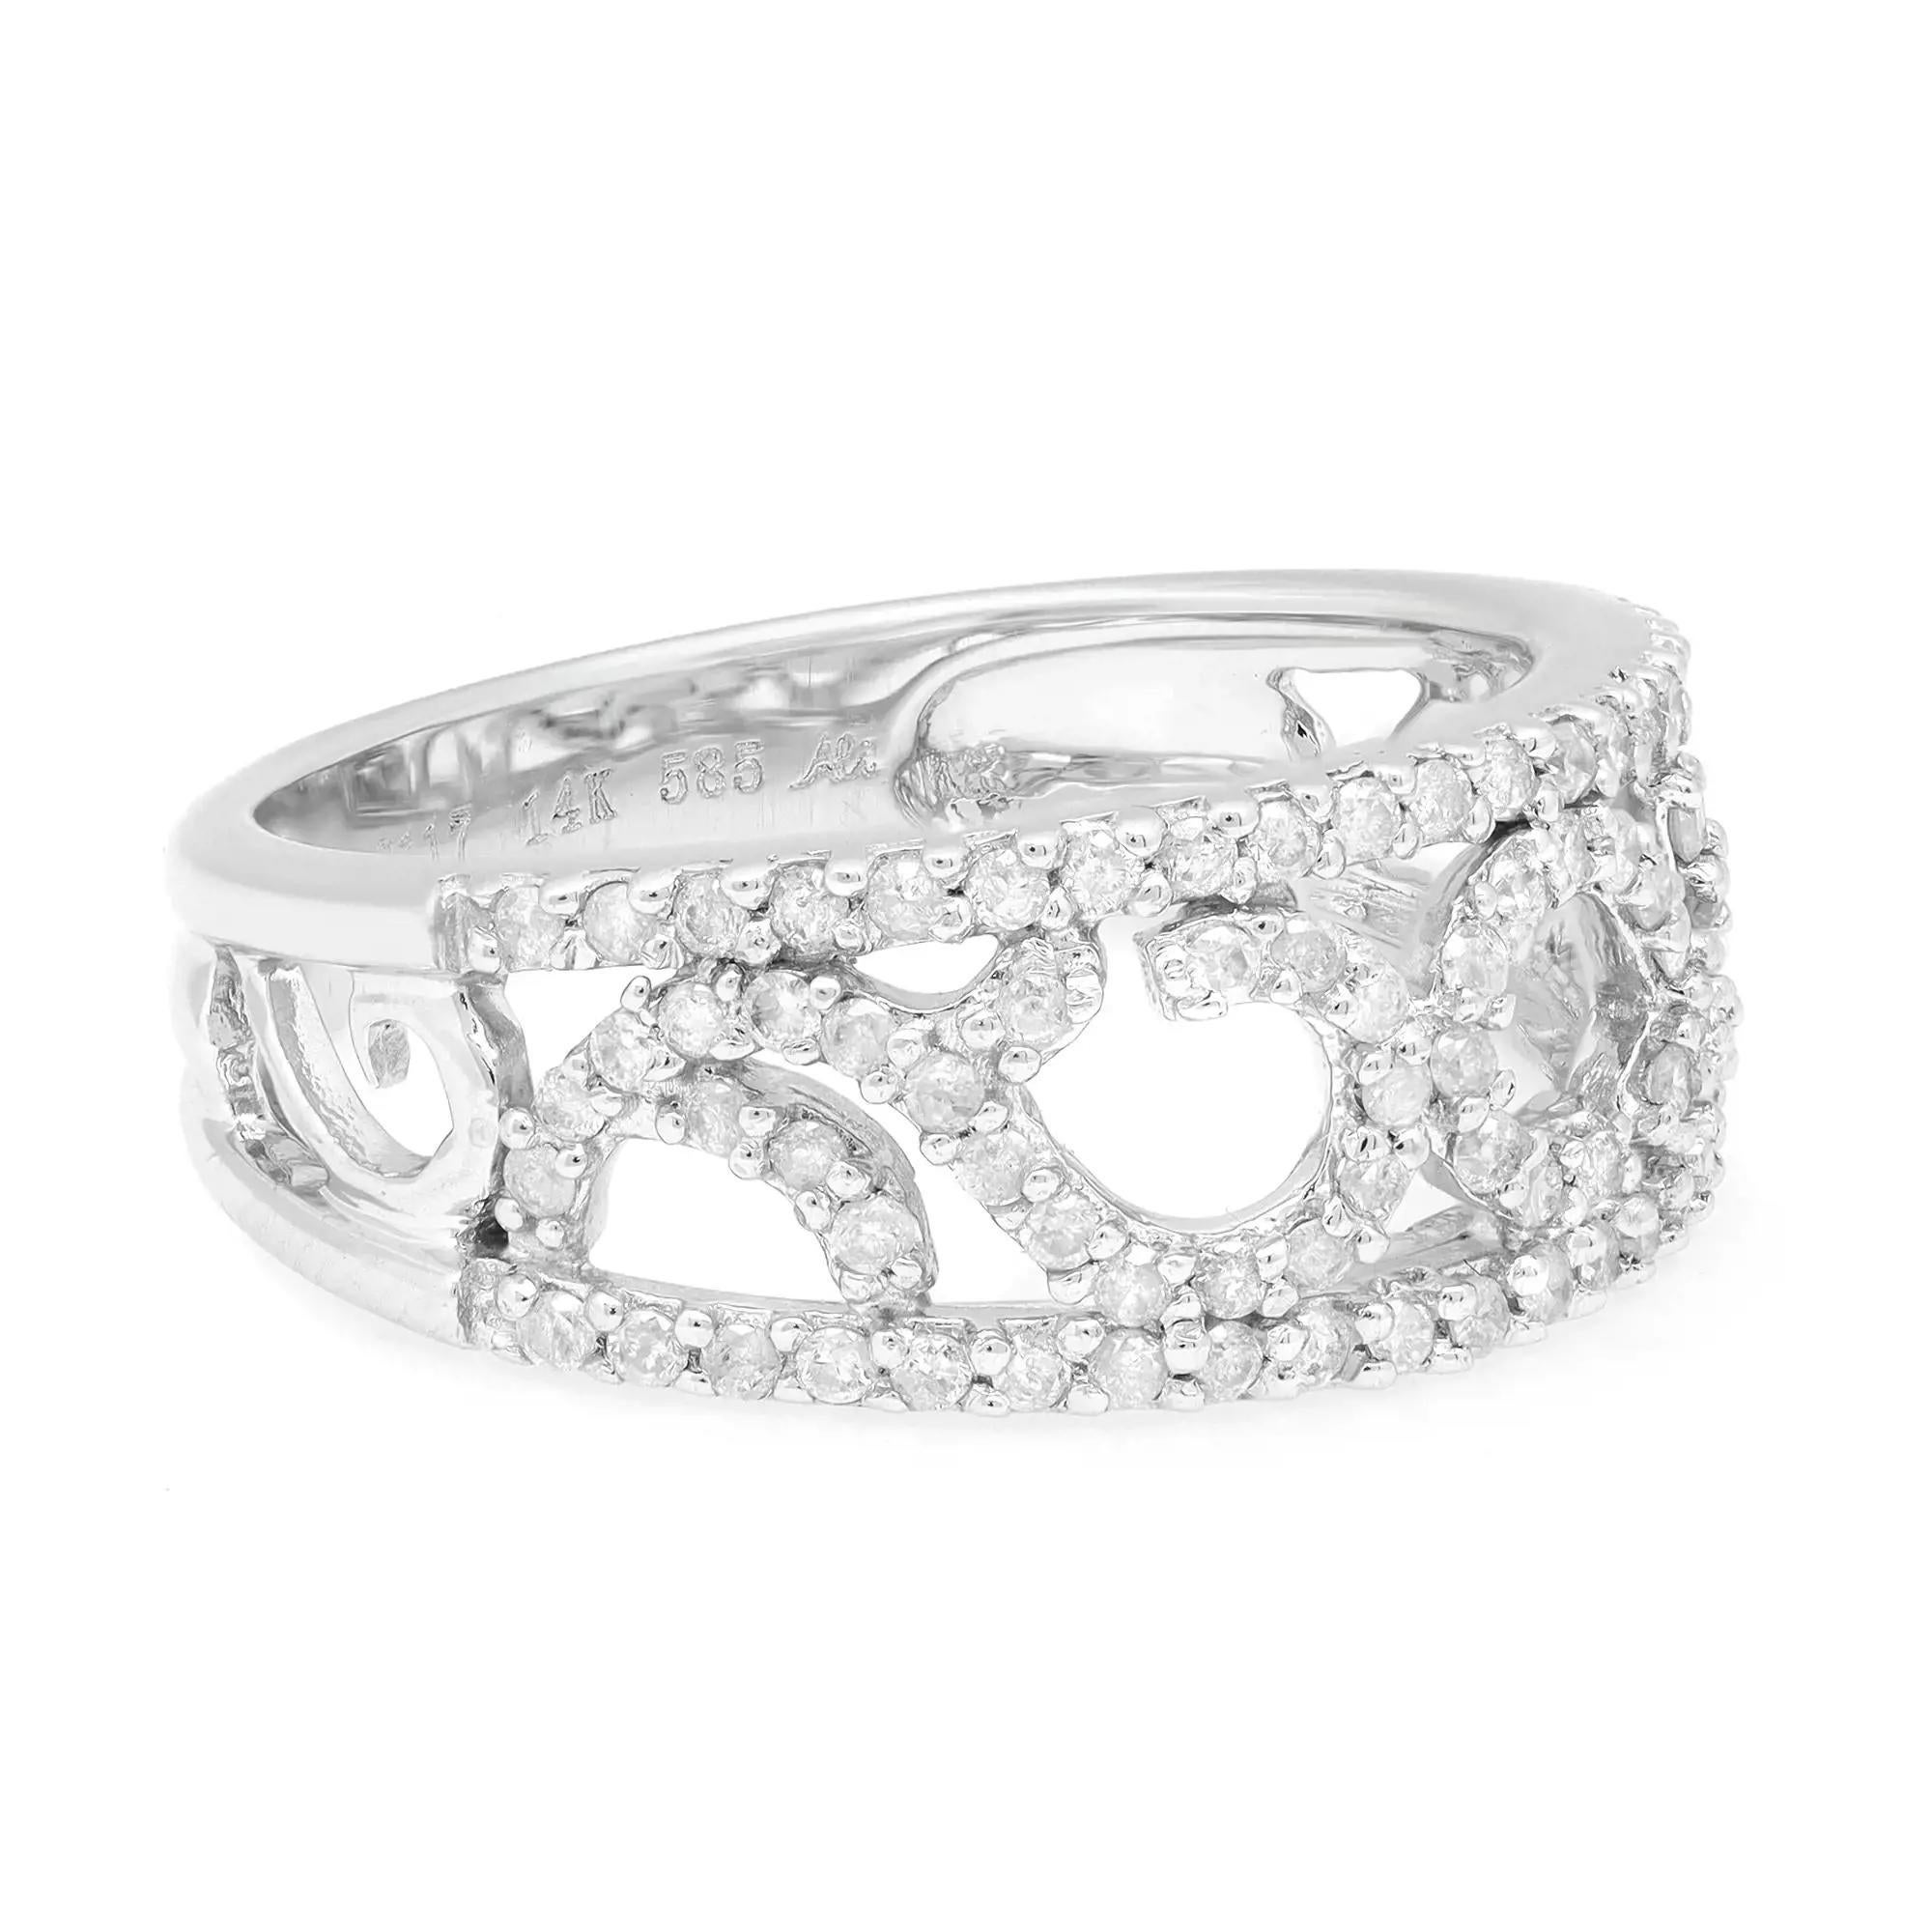 Rachel Koen 0.53cttw Round Cut Diamond Band Ring 14k White Gold In New Condition For Sale In New York, NY